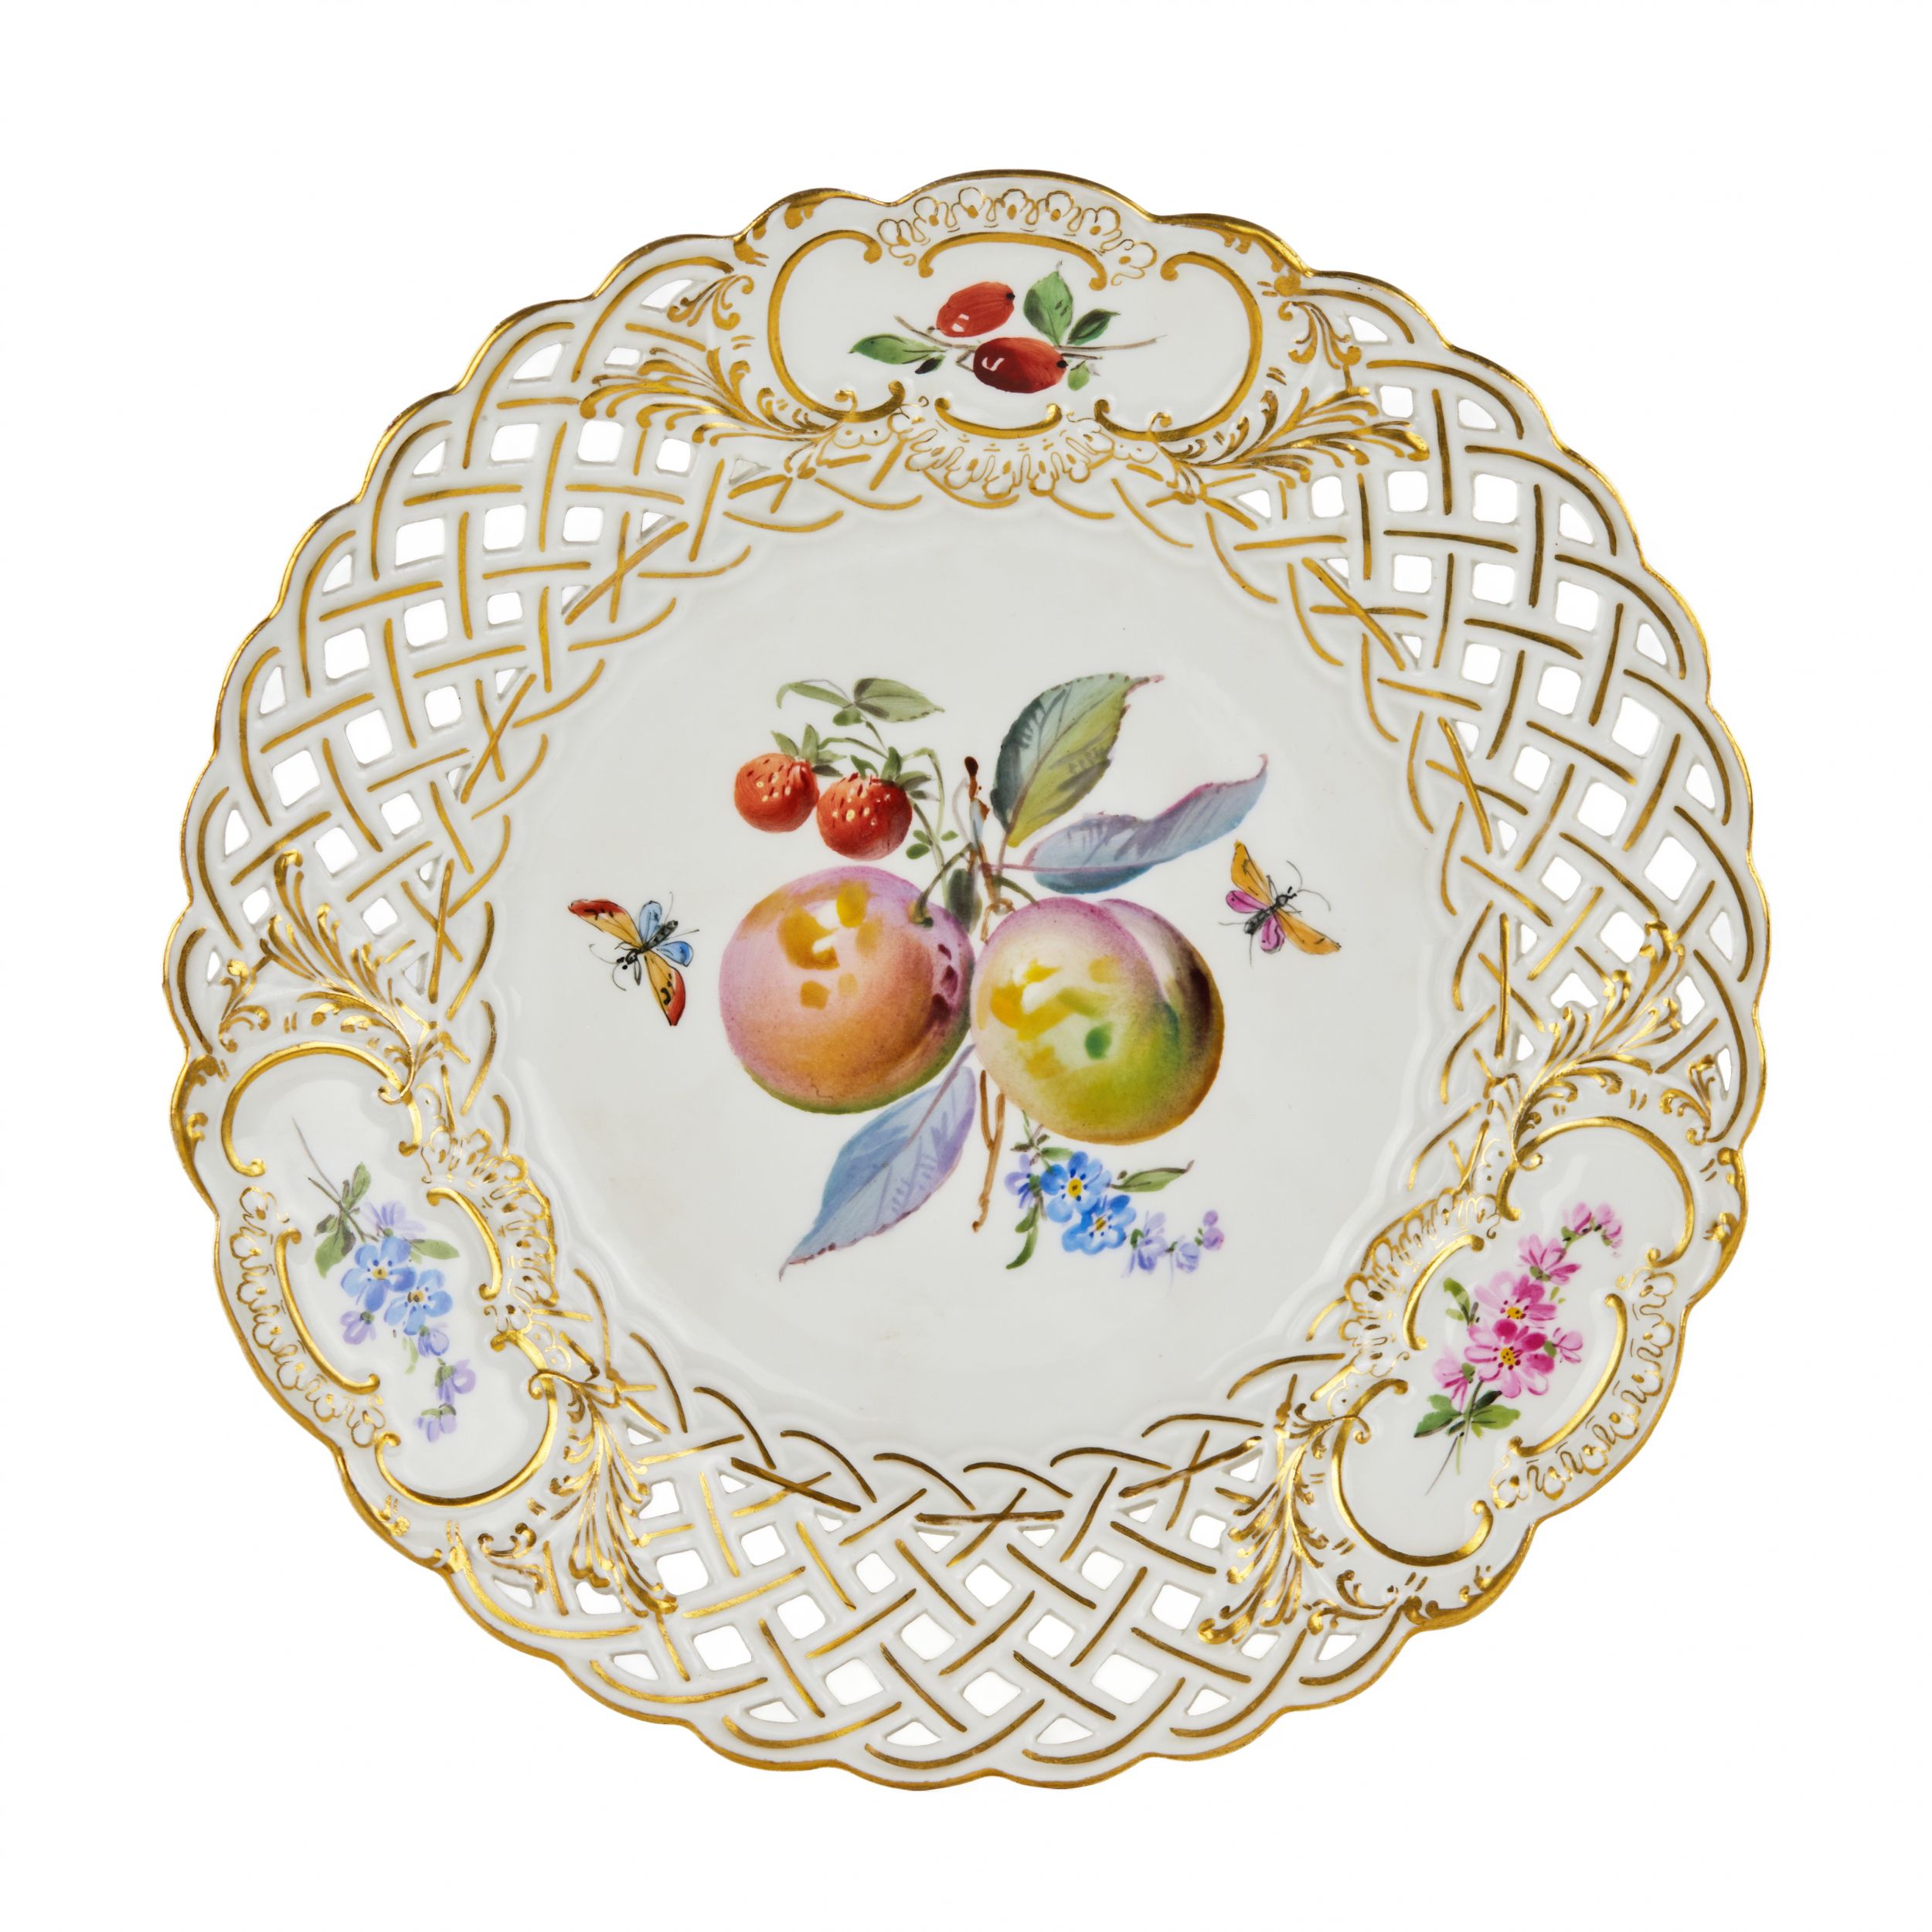 Dessert-porcelain-plate-decorated-with-images-of-berries-and-fruits-Meissen-After-1934-